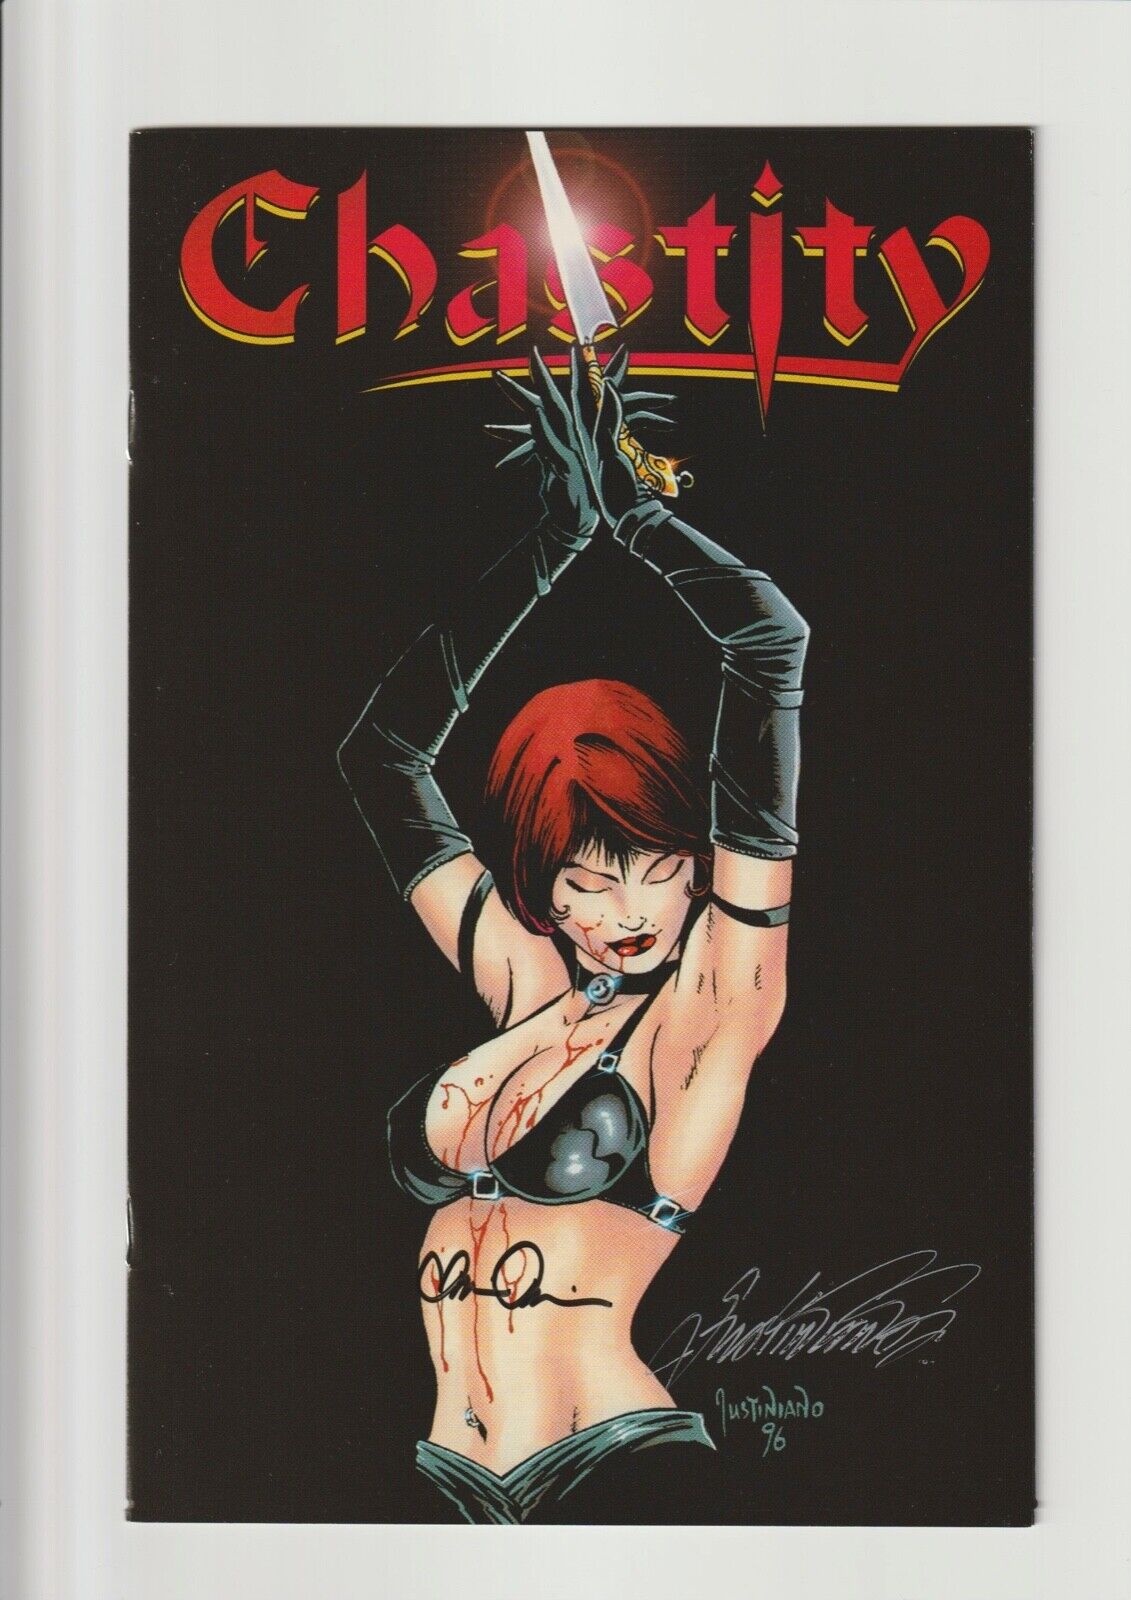 CHASTITY: THEATRE OF PAIN #1 VF+ 8.5 ONYX PREMIUM EDITION *DOUBLE SIGNED* 1997